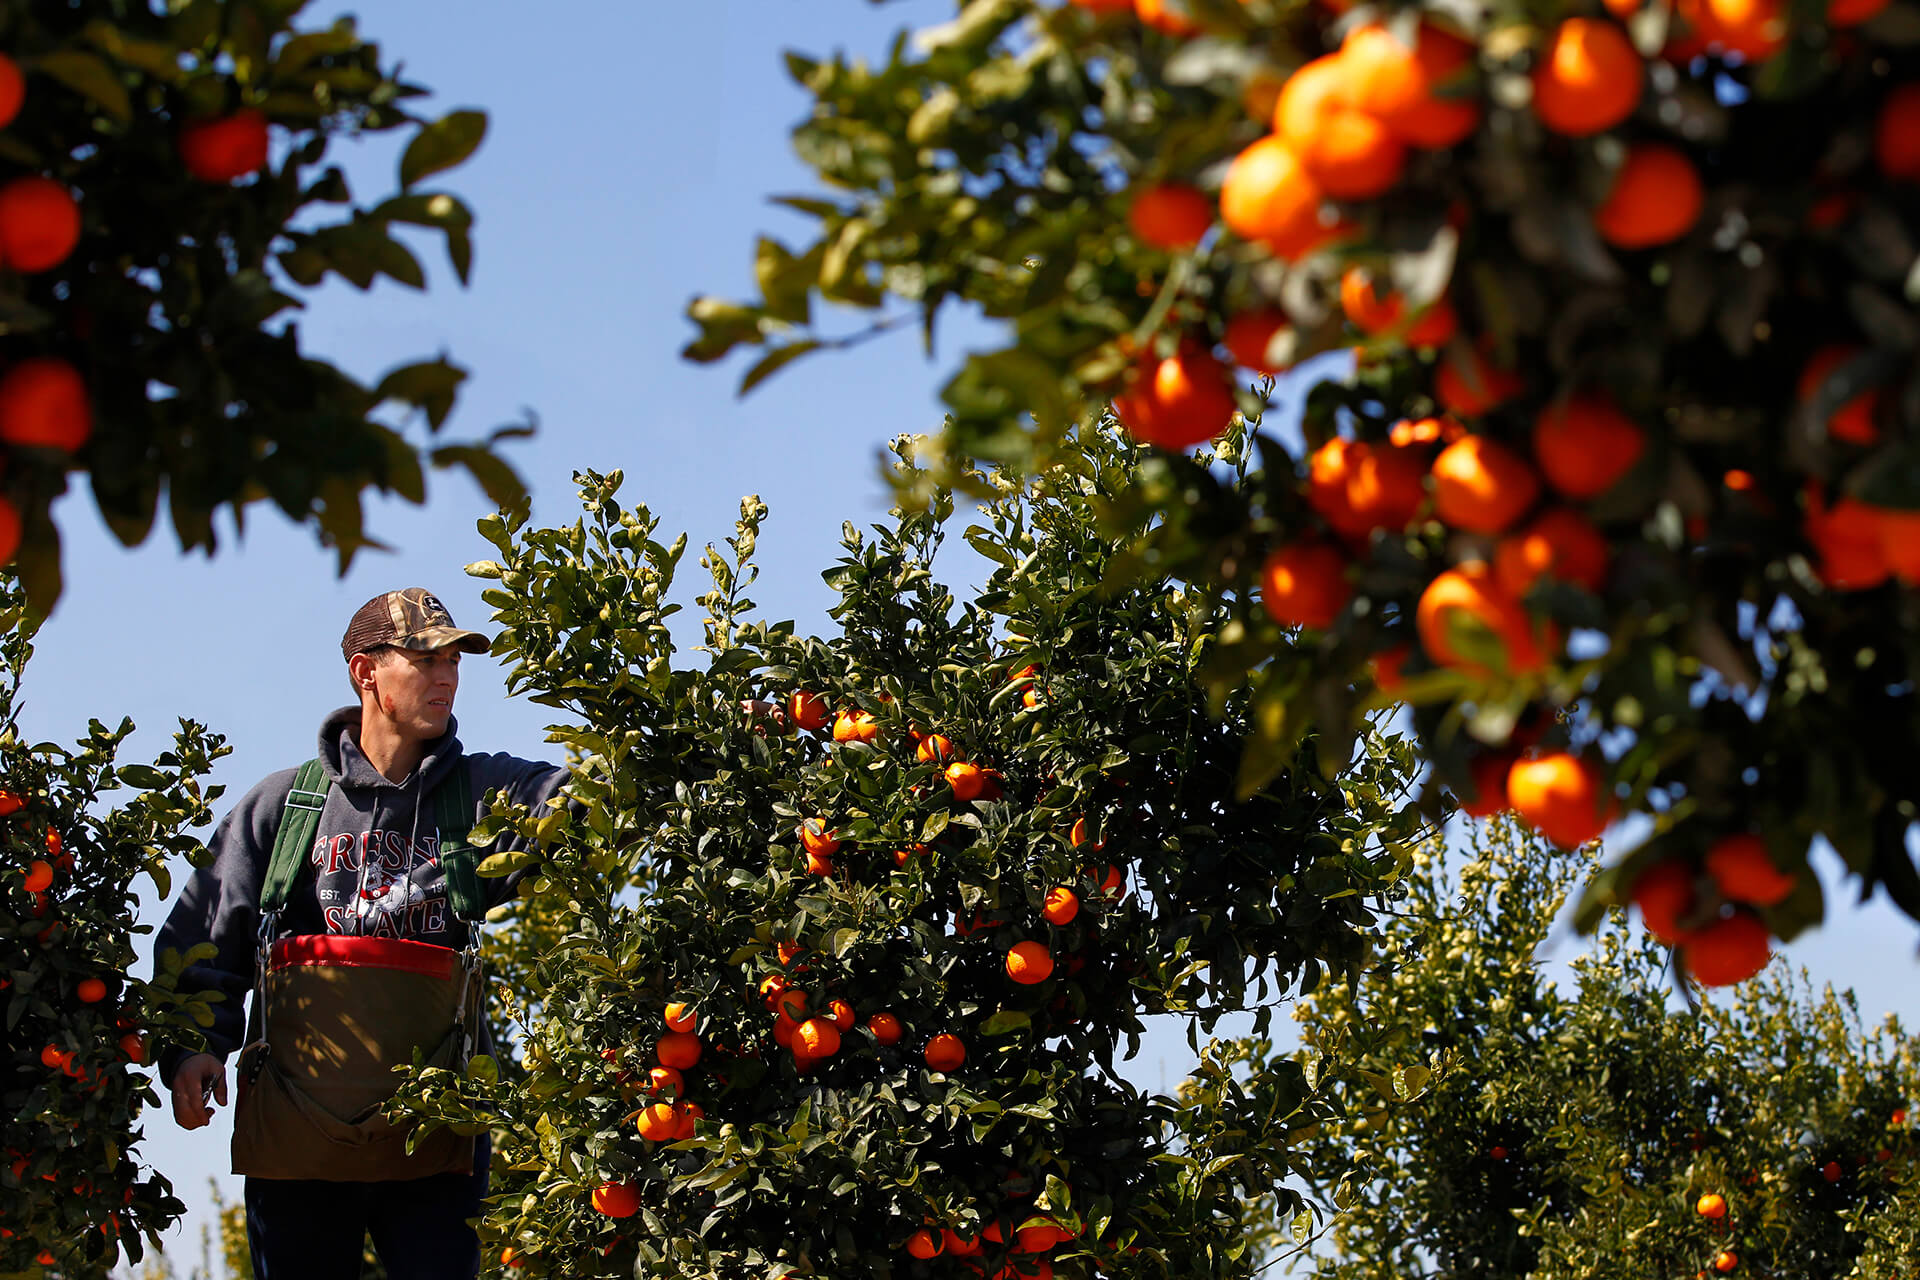 An ag student picks oranges from the orchard Photo